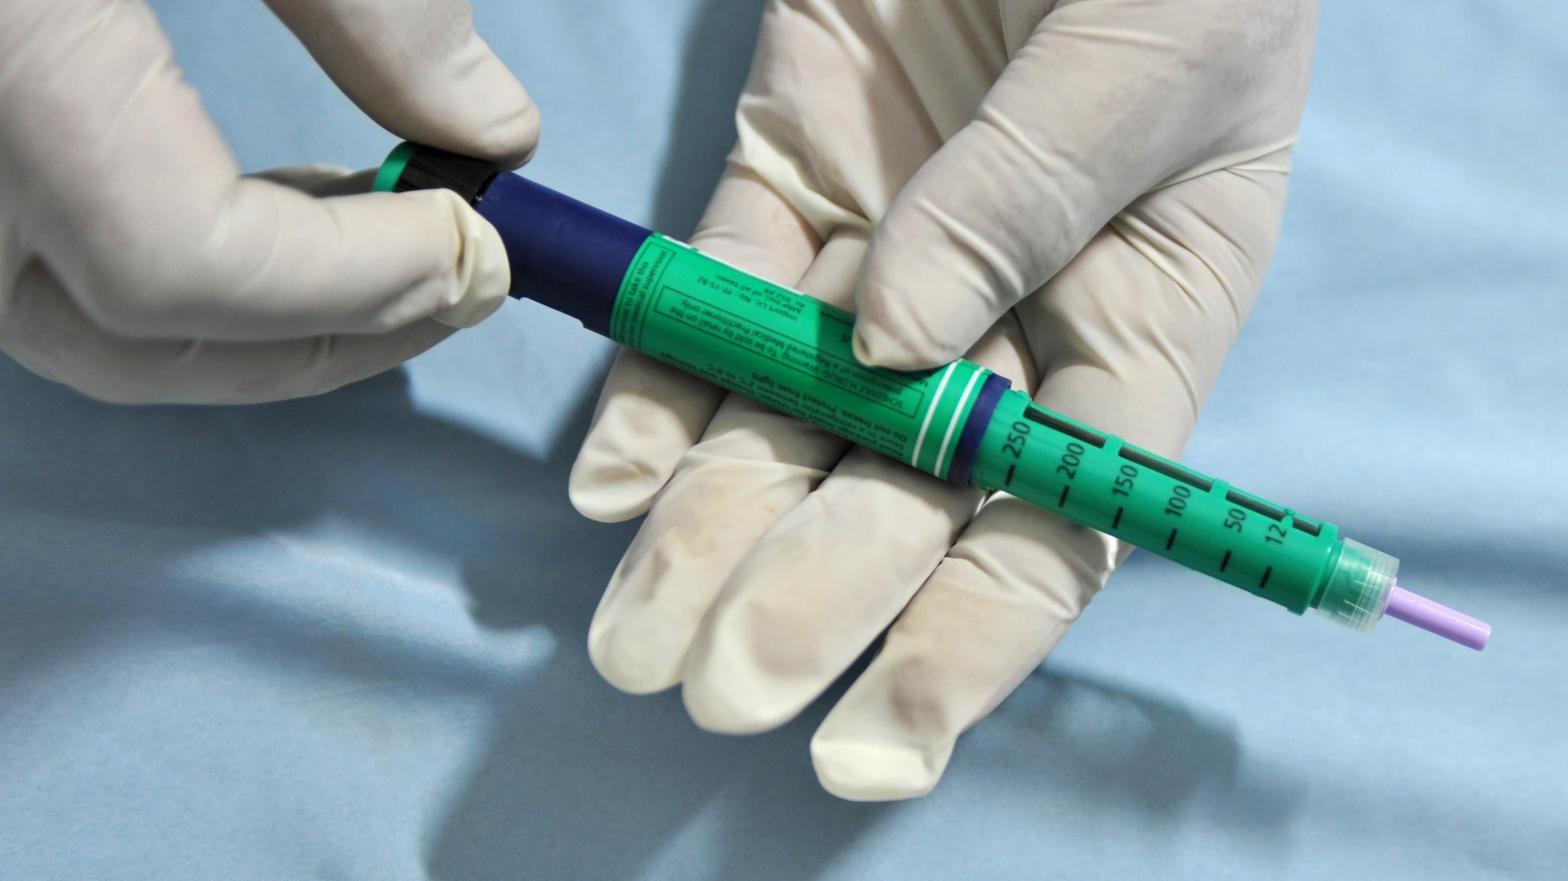 An insulin pen. (Photo: Sajjad Hussain/AFP, Getty Images)